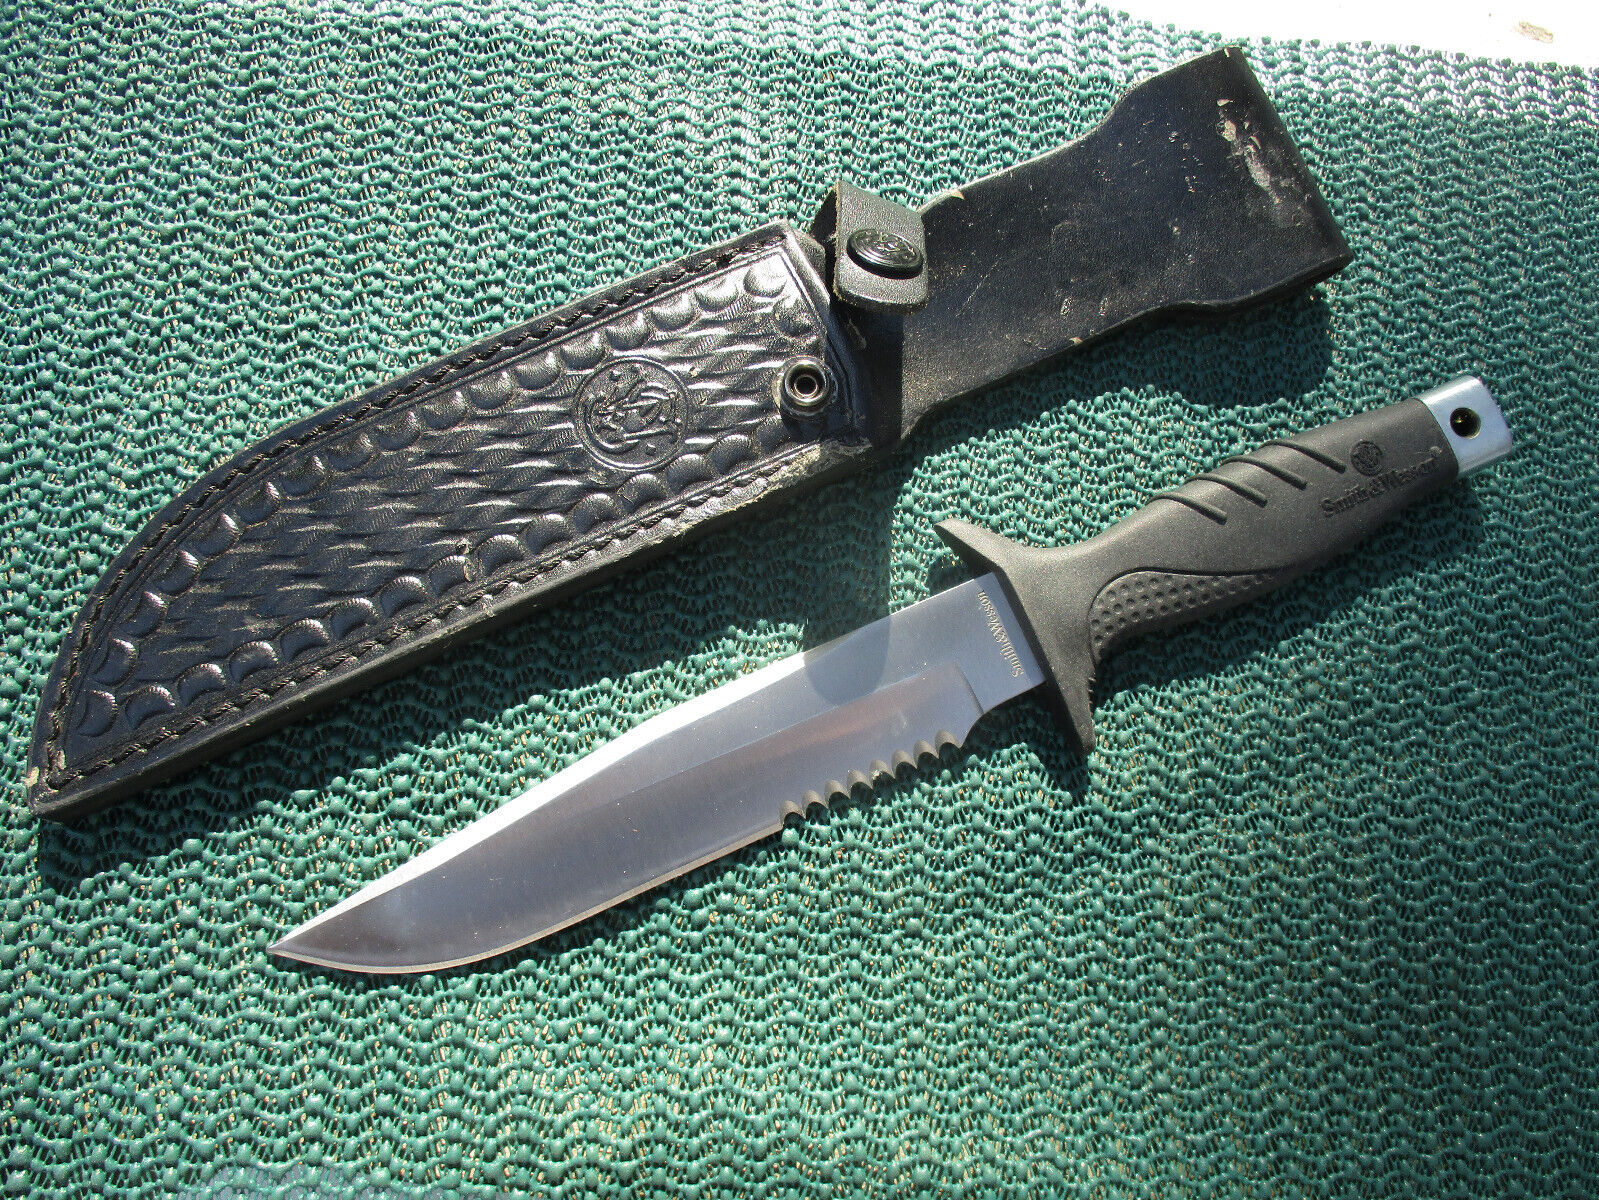 Smith & Wesson SW980 Knife Unknown Vintage and origin